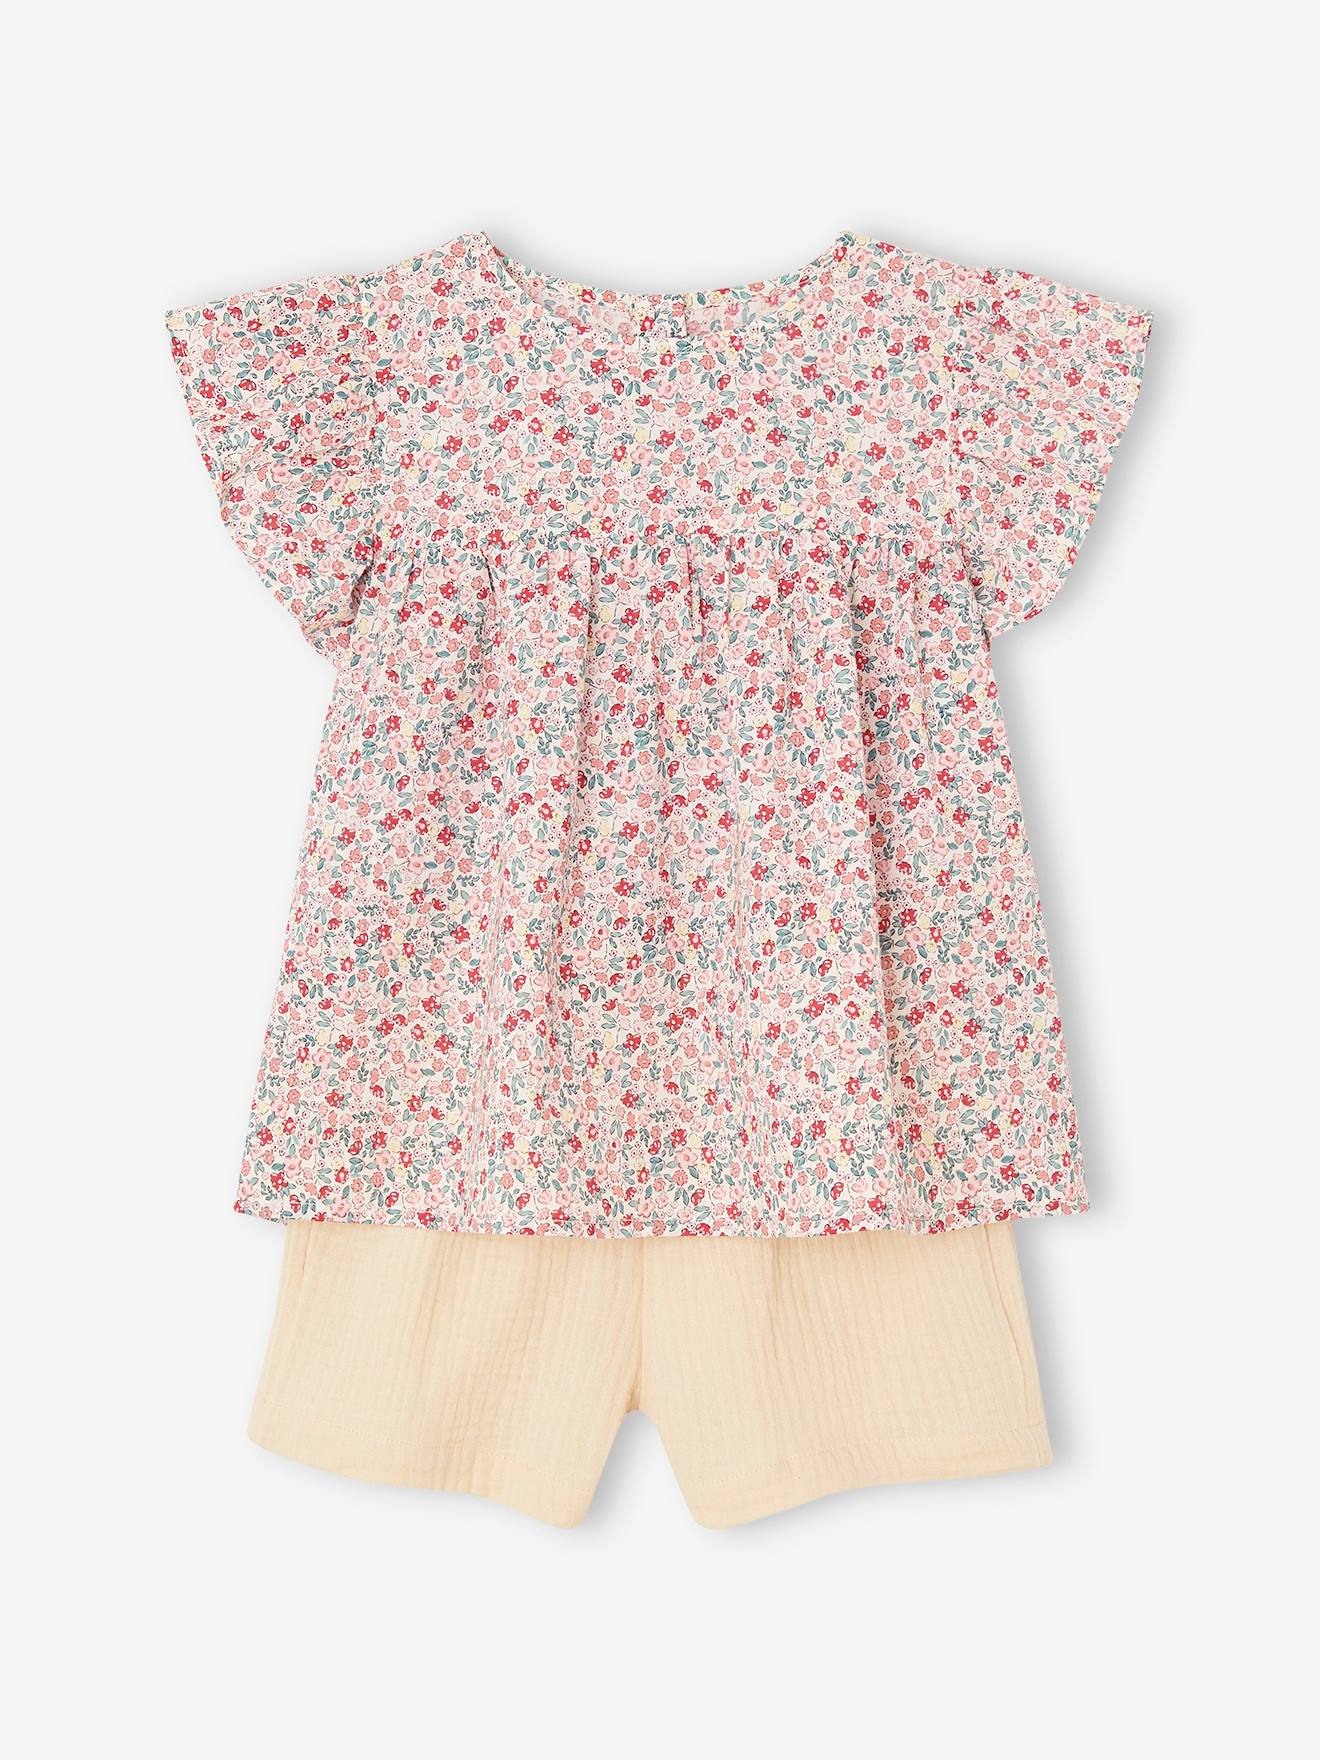 Blouse with Flowers & Cotton Gauze Shorts Combo for Girls vanilla